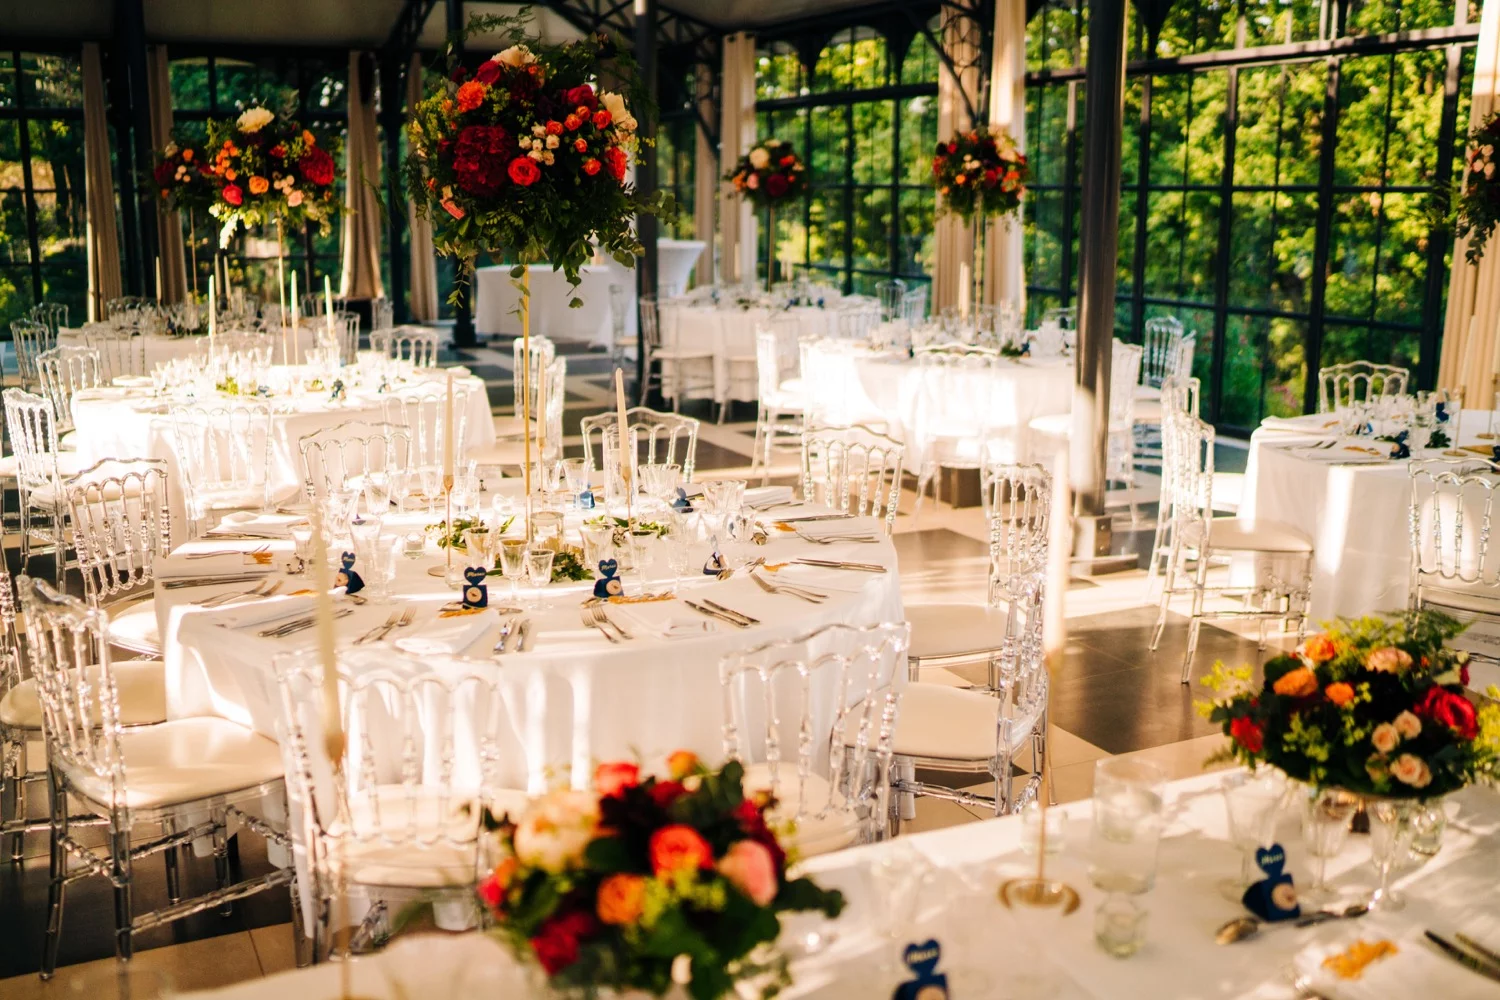 A gorgeous wedding reception set up in the Orangerie at Domaine La Fauconnie in France, one of the most beautiful wedding venues in Europe.